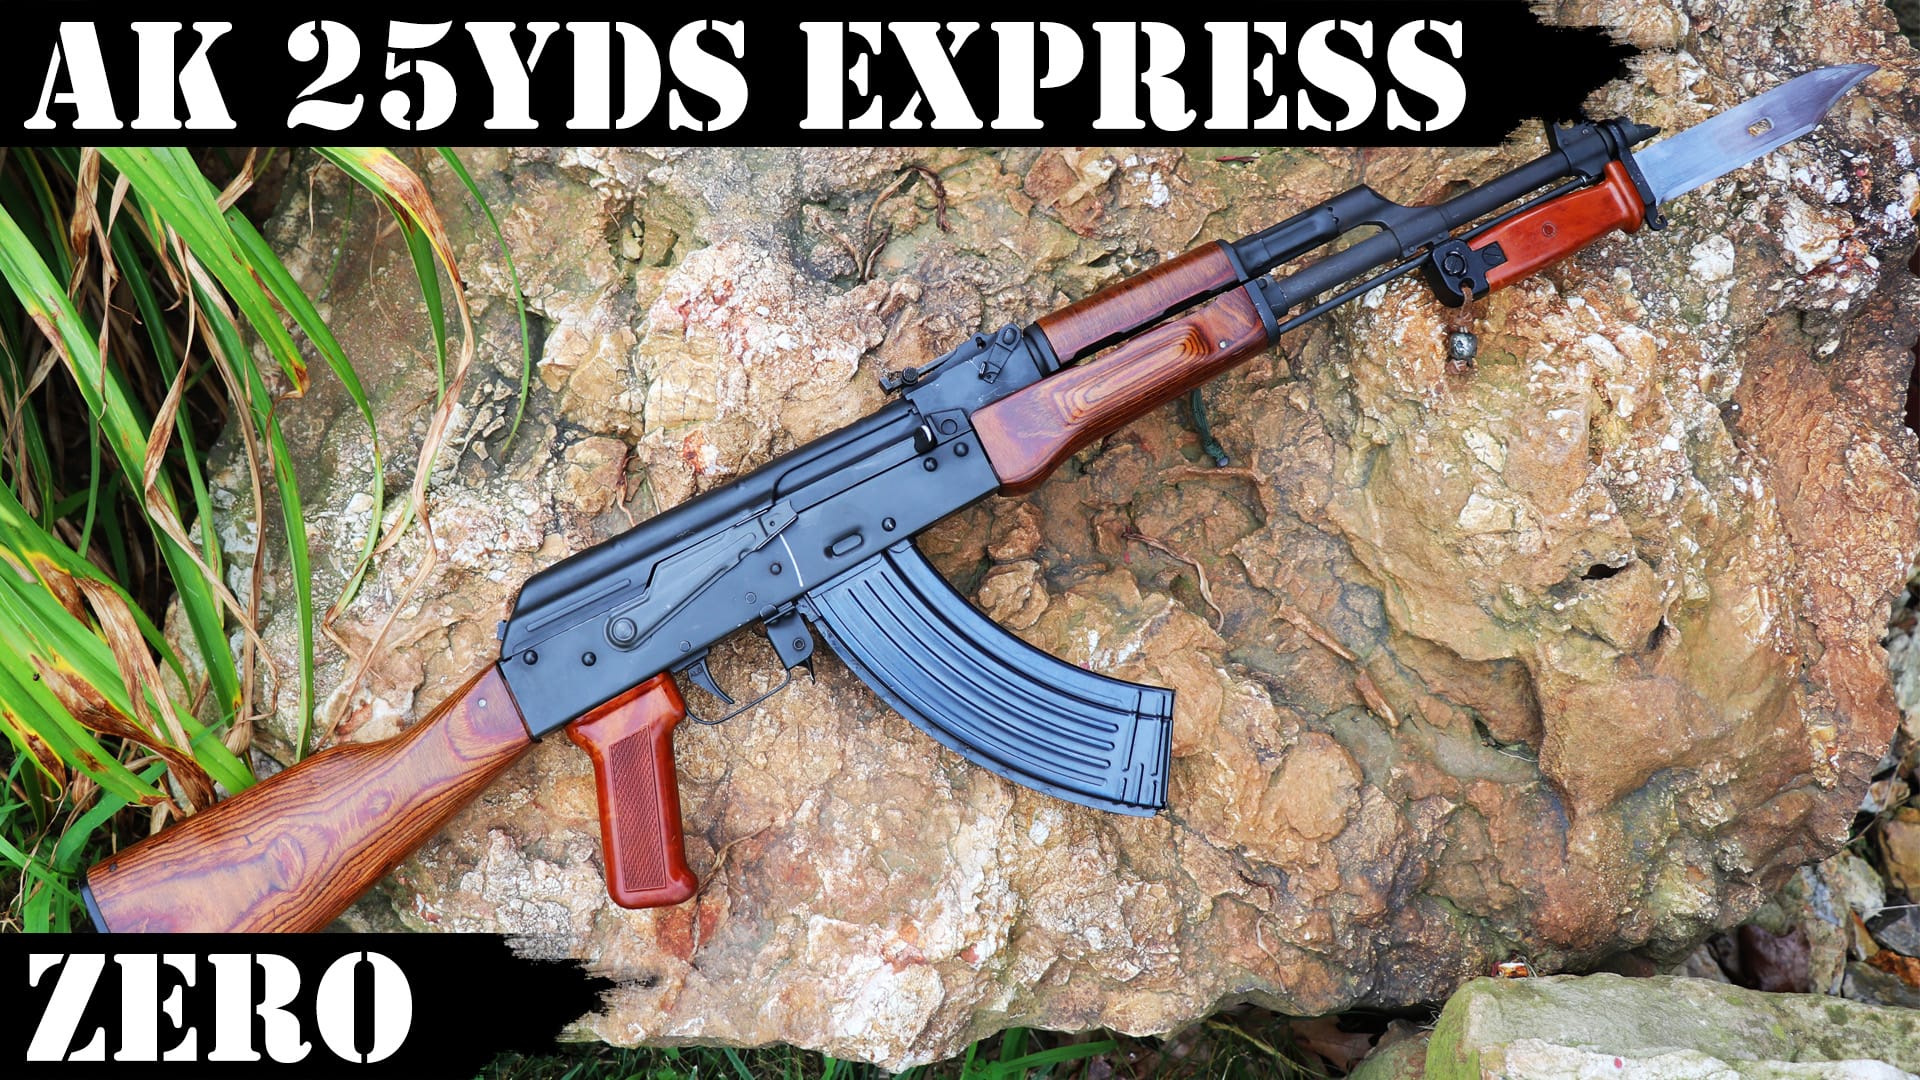 AK 25 Yards Express Zero: how to zero your AK fast and be on target up to 300 Yards!